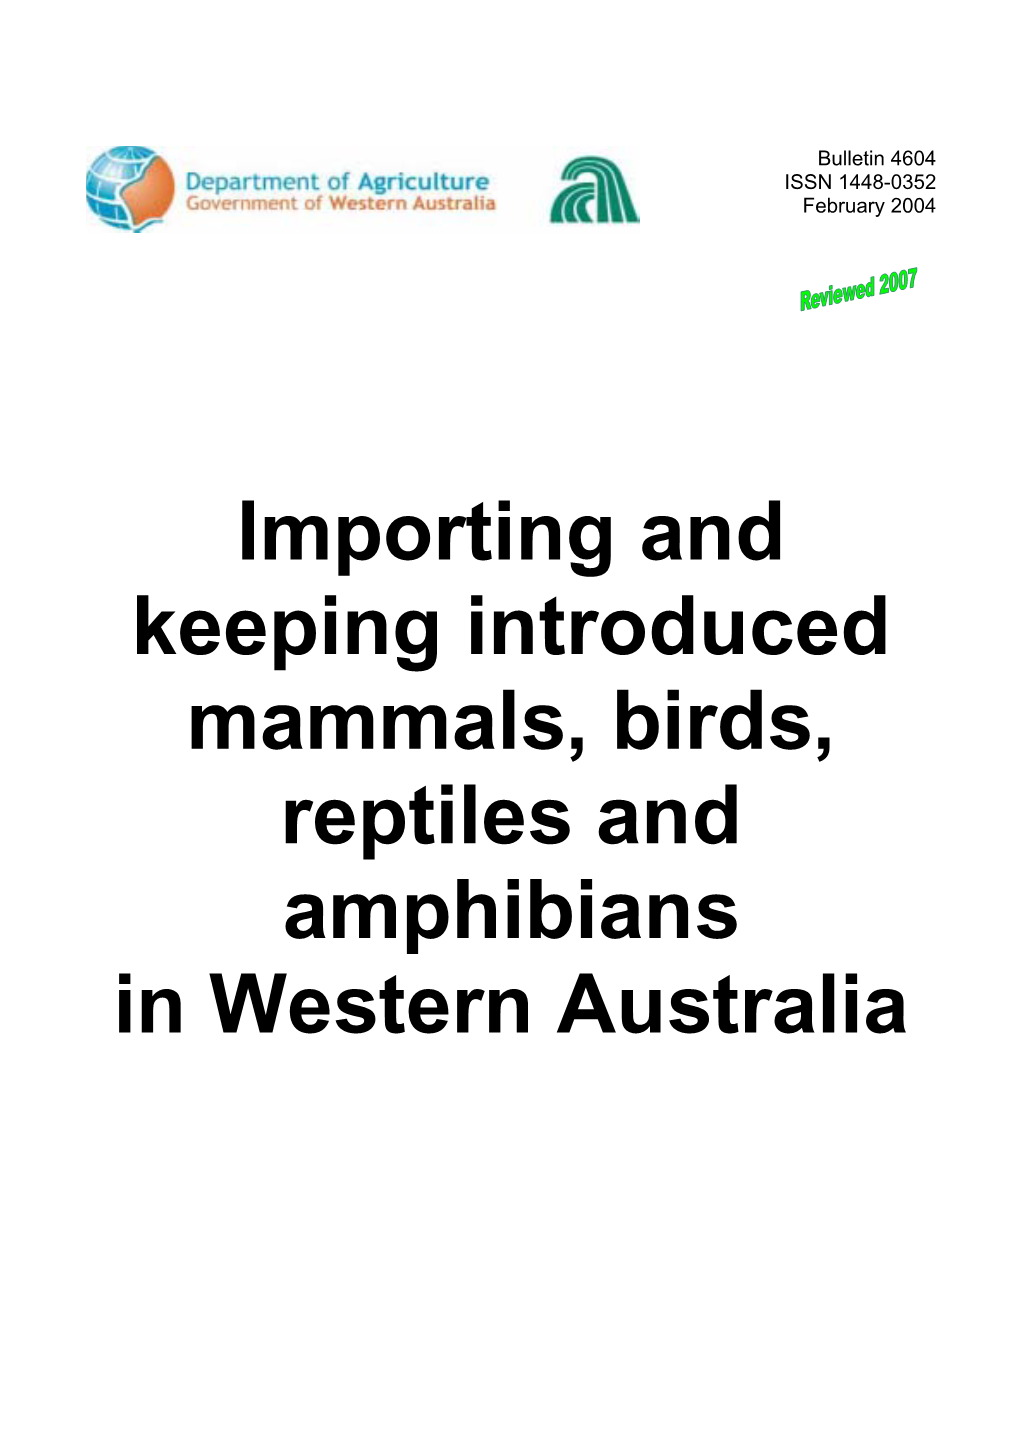 Importing and Keeping Introduced Mammals, Birds, Reptiles And